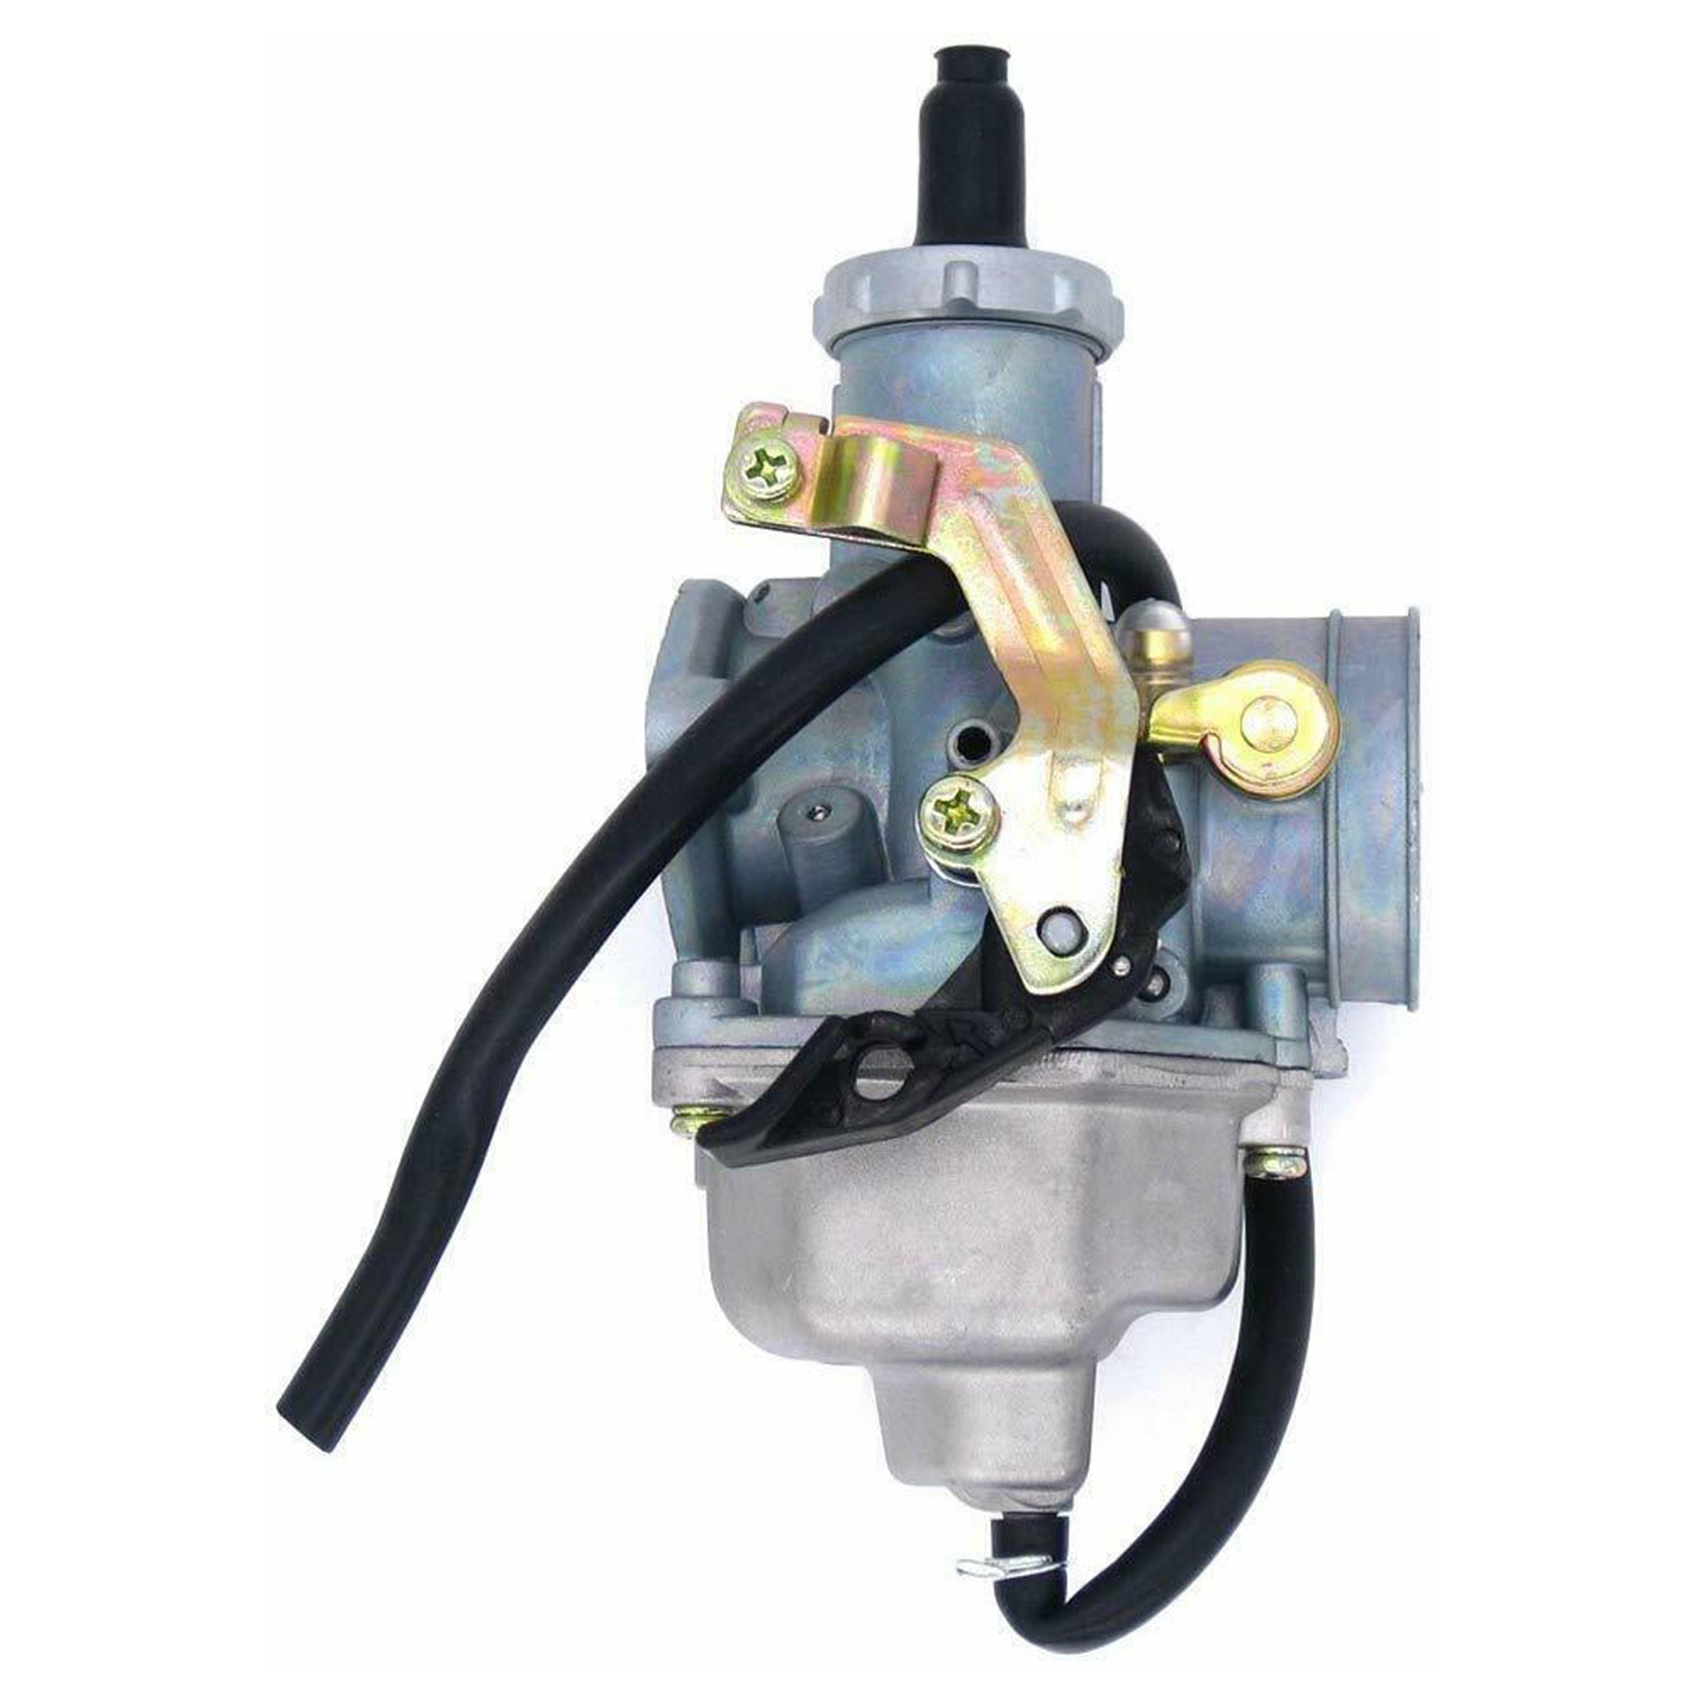 PZ30 Carburetor is Suitable for 200 250 300 Cc Off-Road Vehicles, with Manual Operation Chain ATV Scooter Light Engine